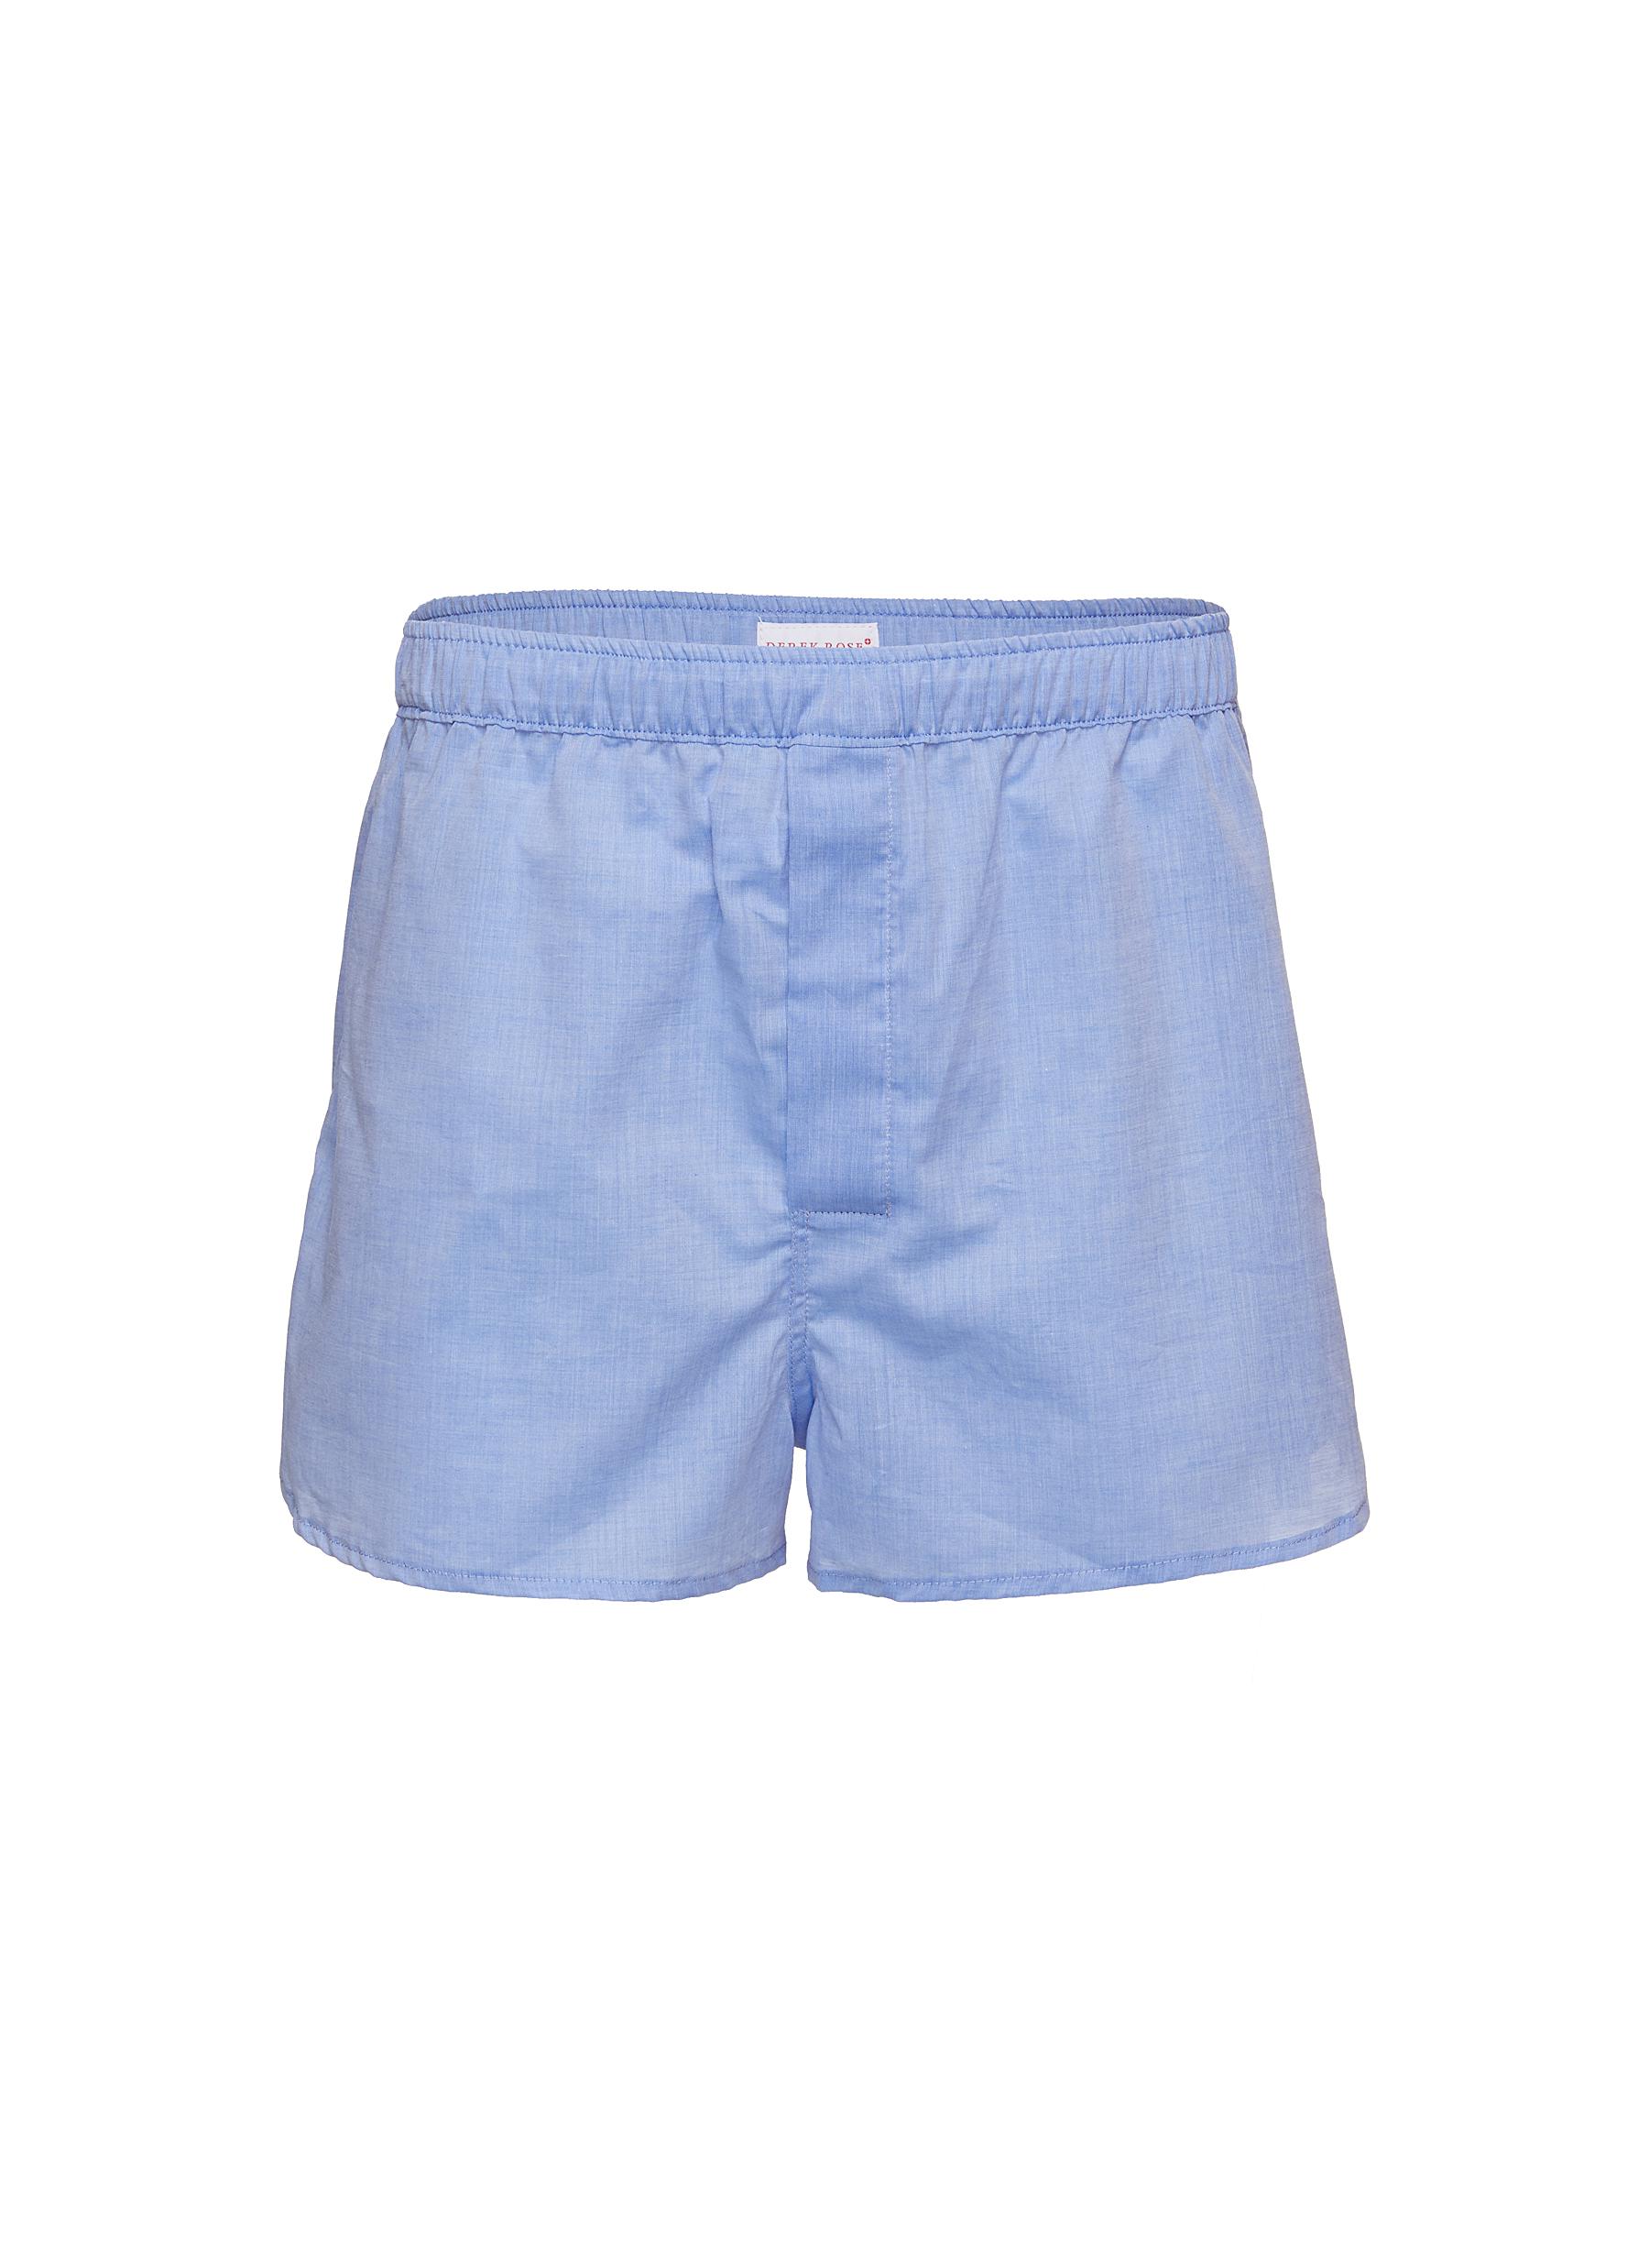 Amalfi Magnetic Fly Cotton Boxers